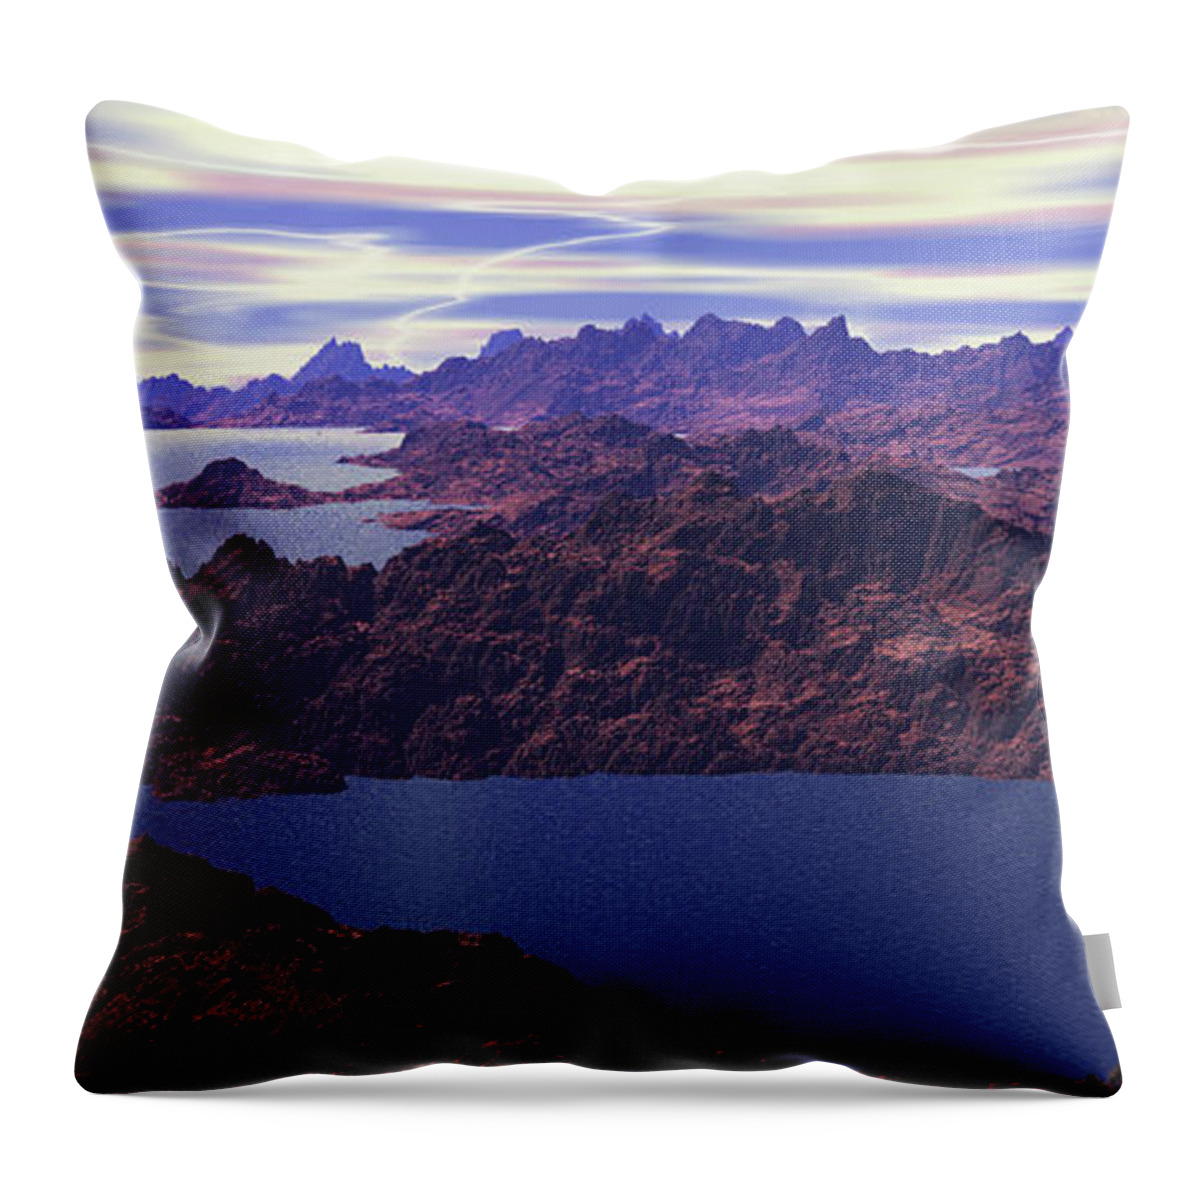 Planet Throw Pillow featuring the digital art Exoplanet #1 by Bernie Sirelson